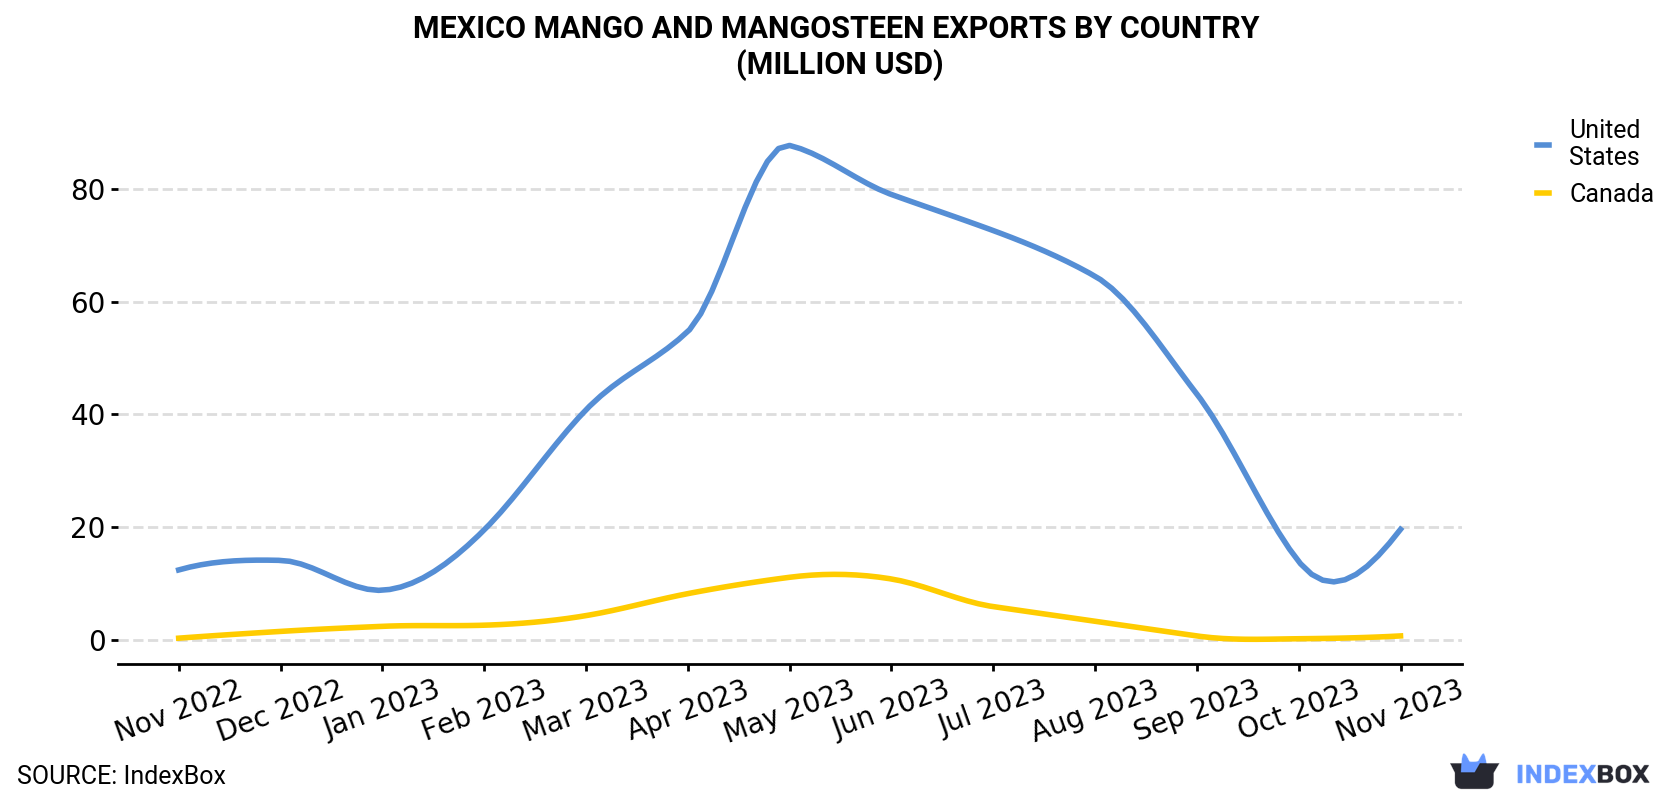 Mexico Mango And Mangosteen Exports By Country (Million USD)